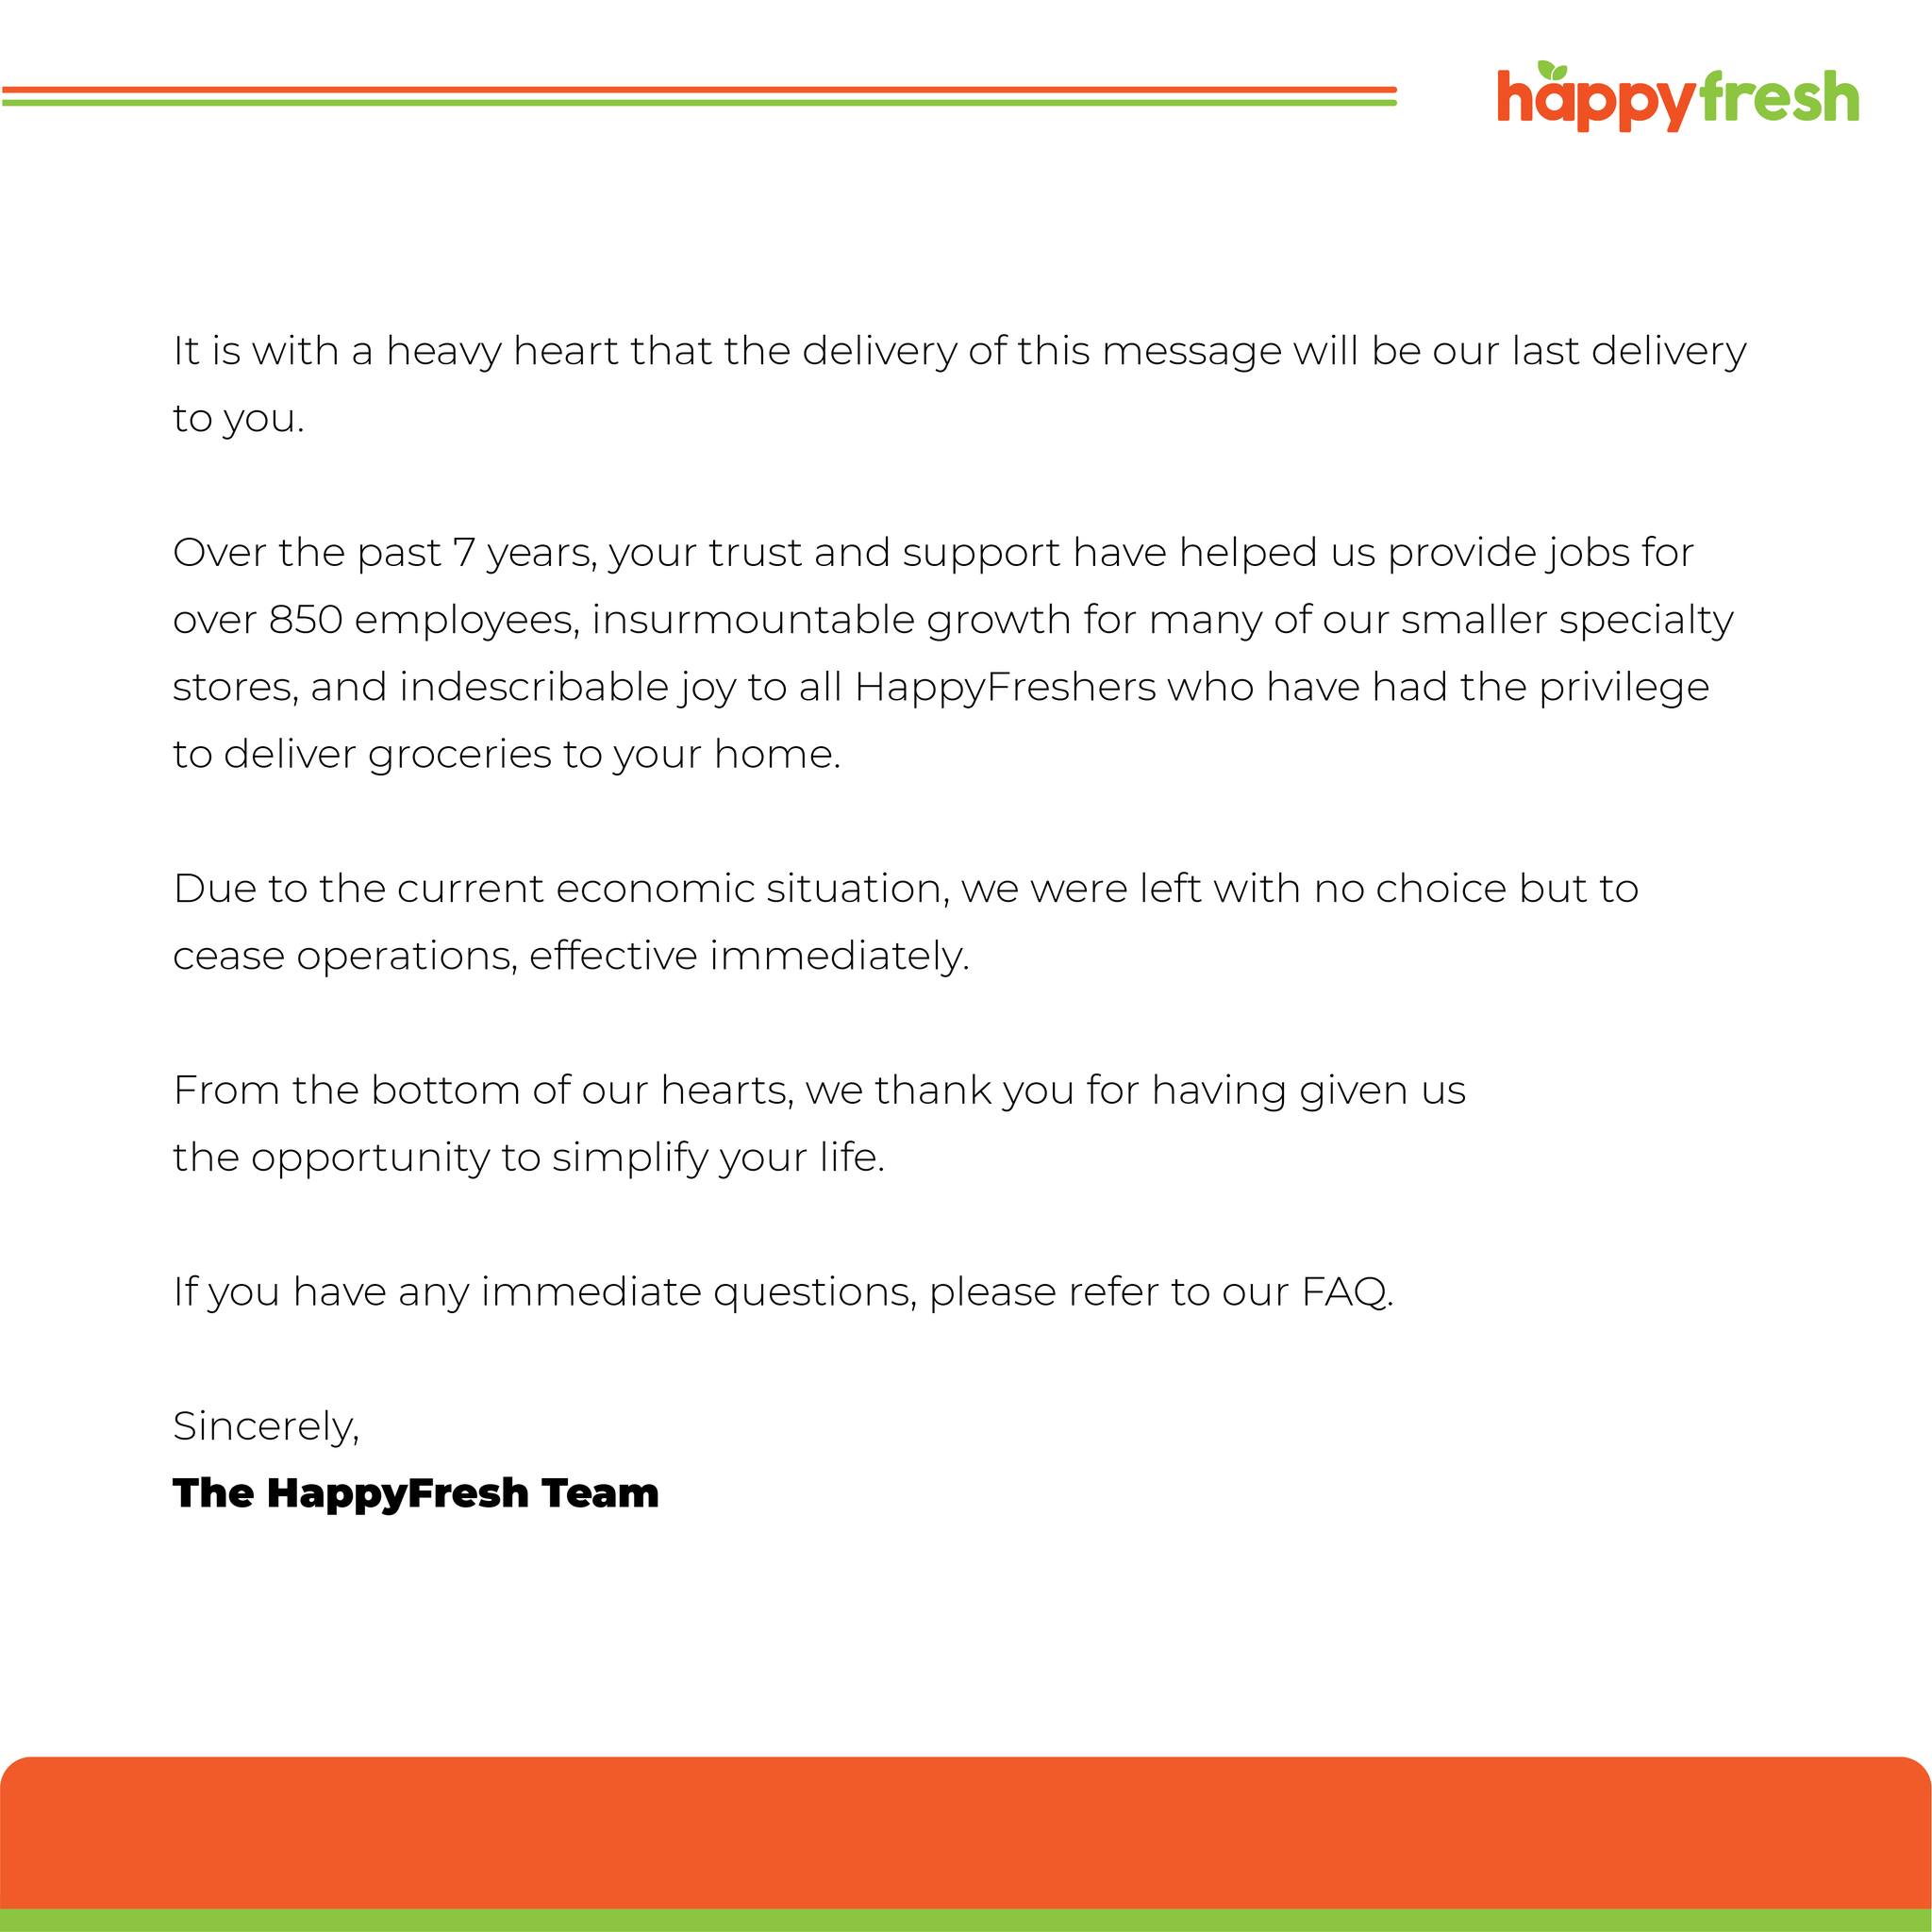 Grocery delivery platform HappyFresh has announced that they will be closing their Malaysian operations. Image credit: HappyFresh Malaysia